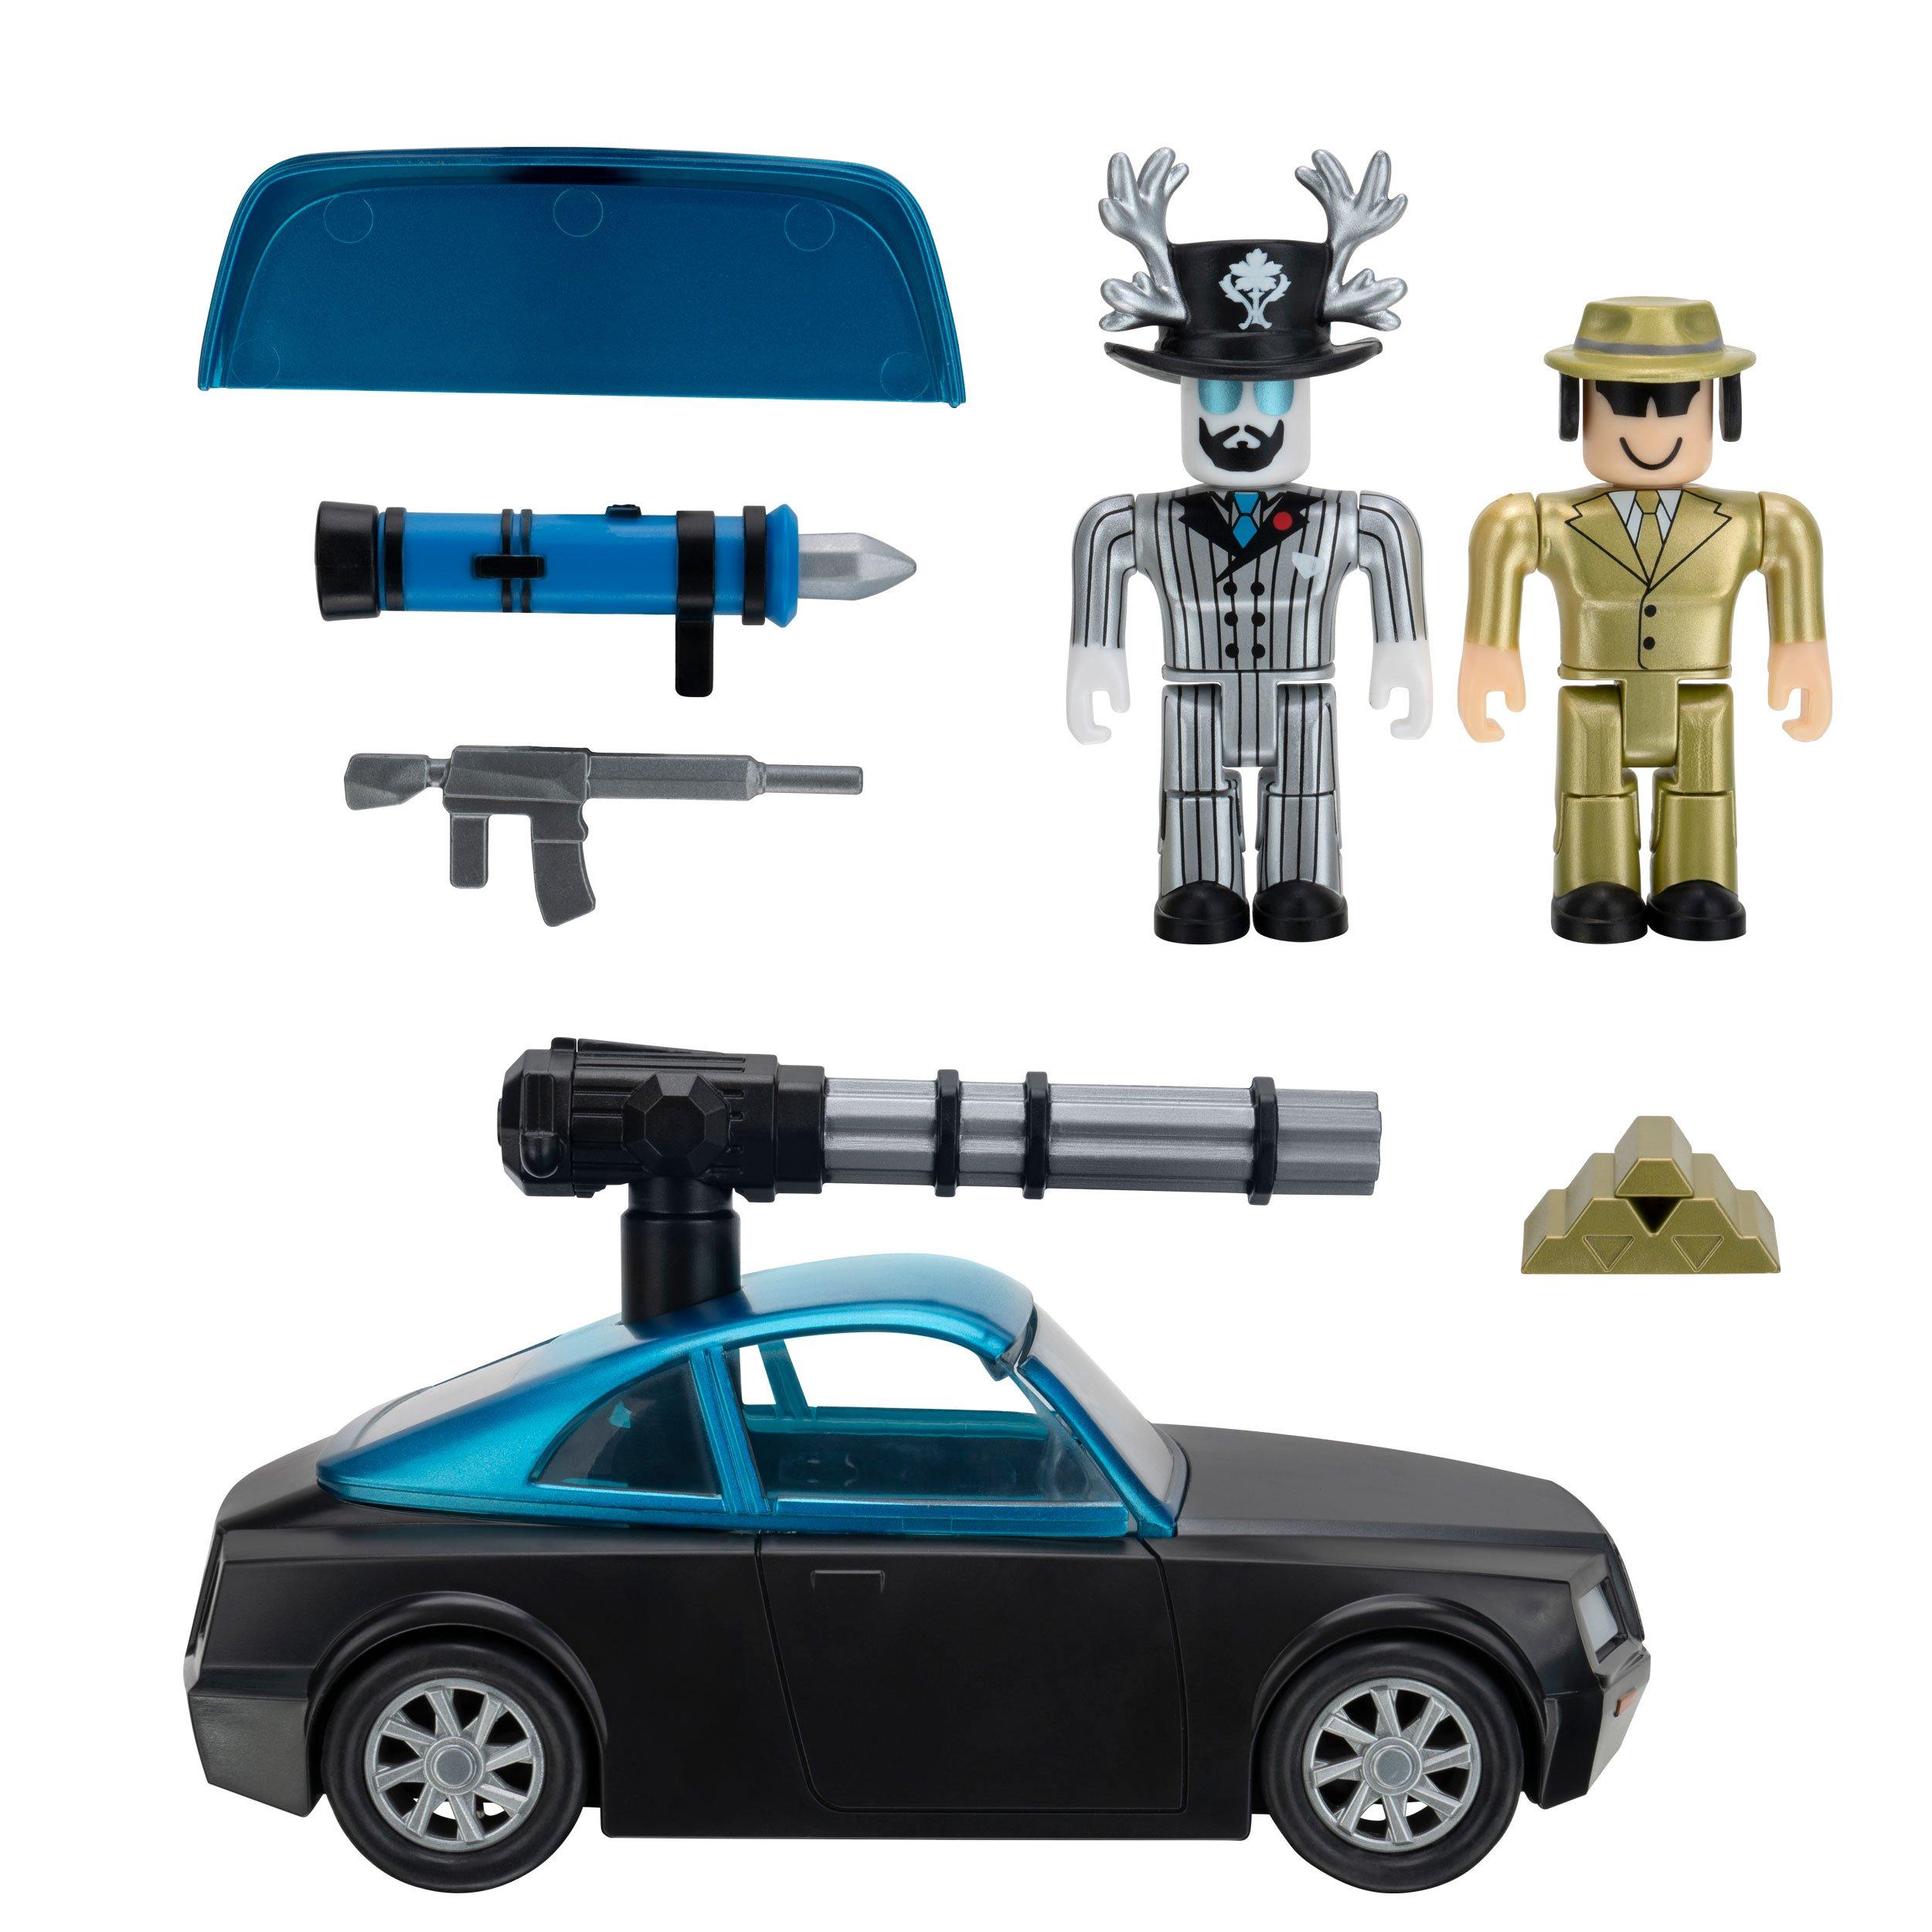 ROBLOX Jailbreak The Celestial 7pc Vehicle and Figures Action Toy Set for sale online